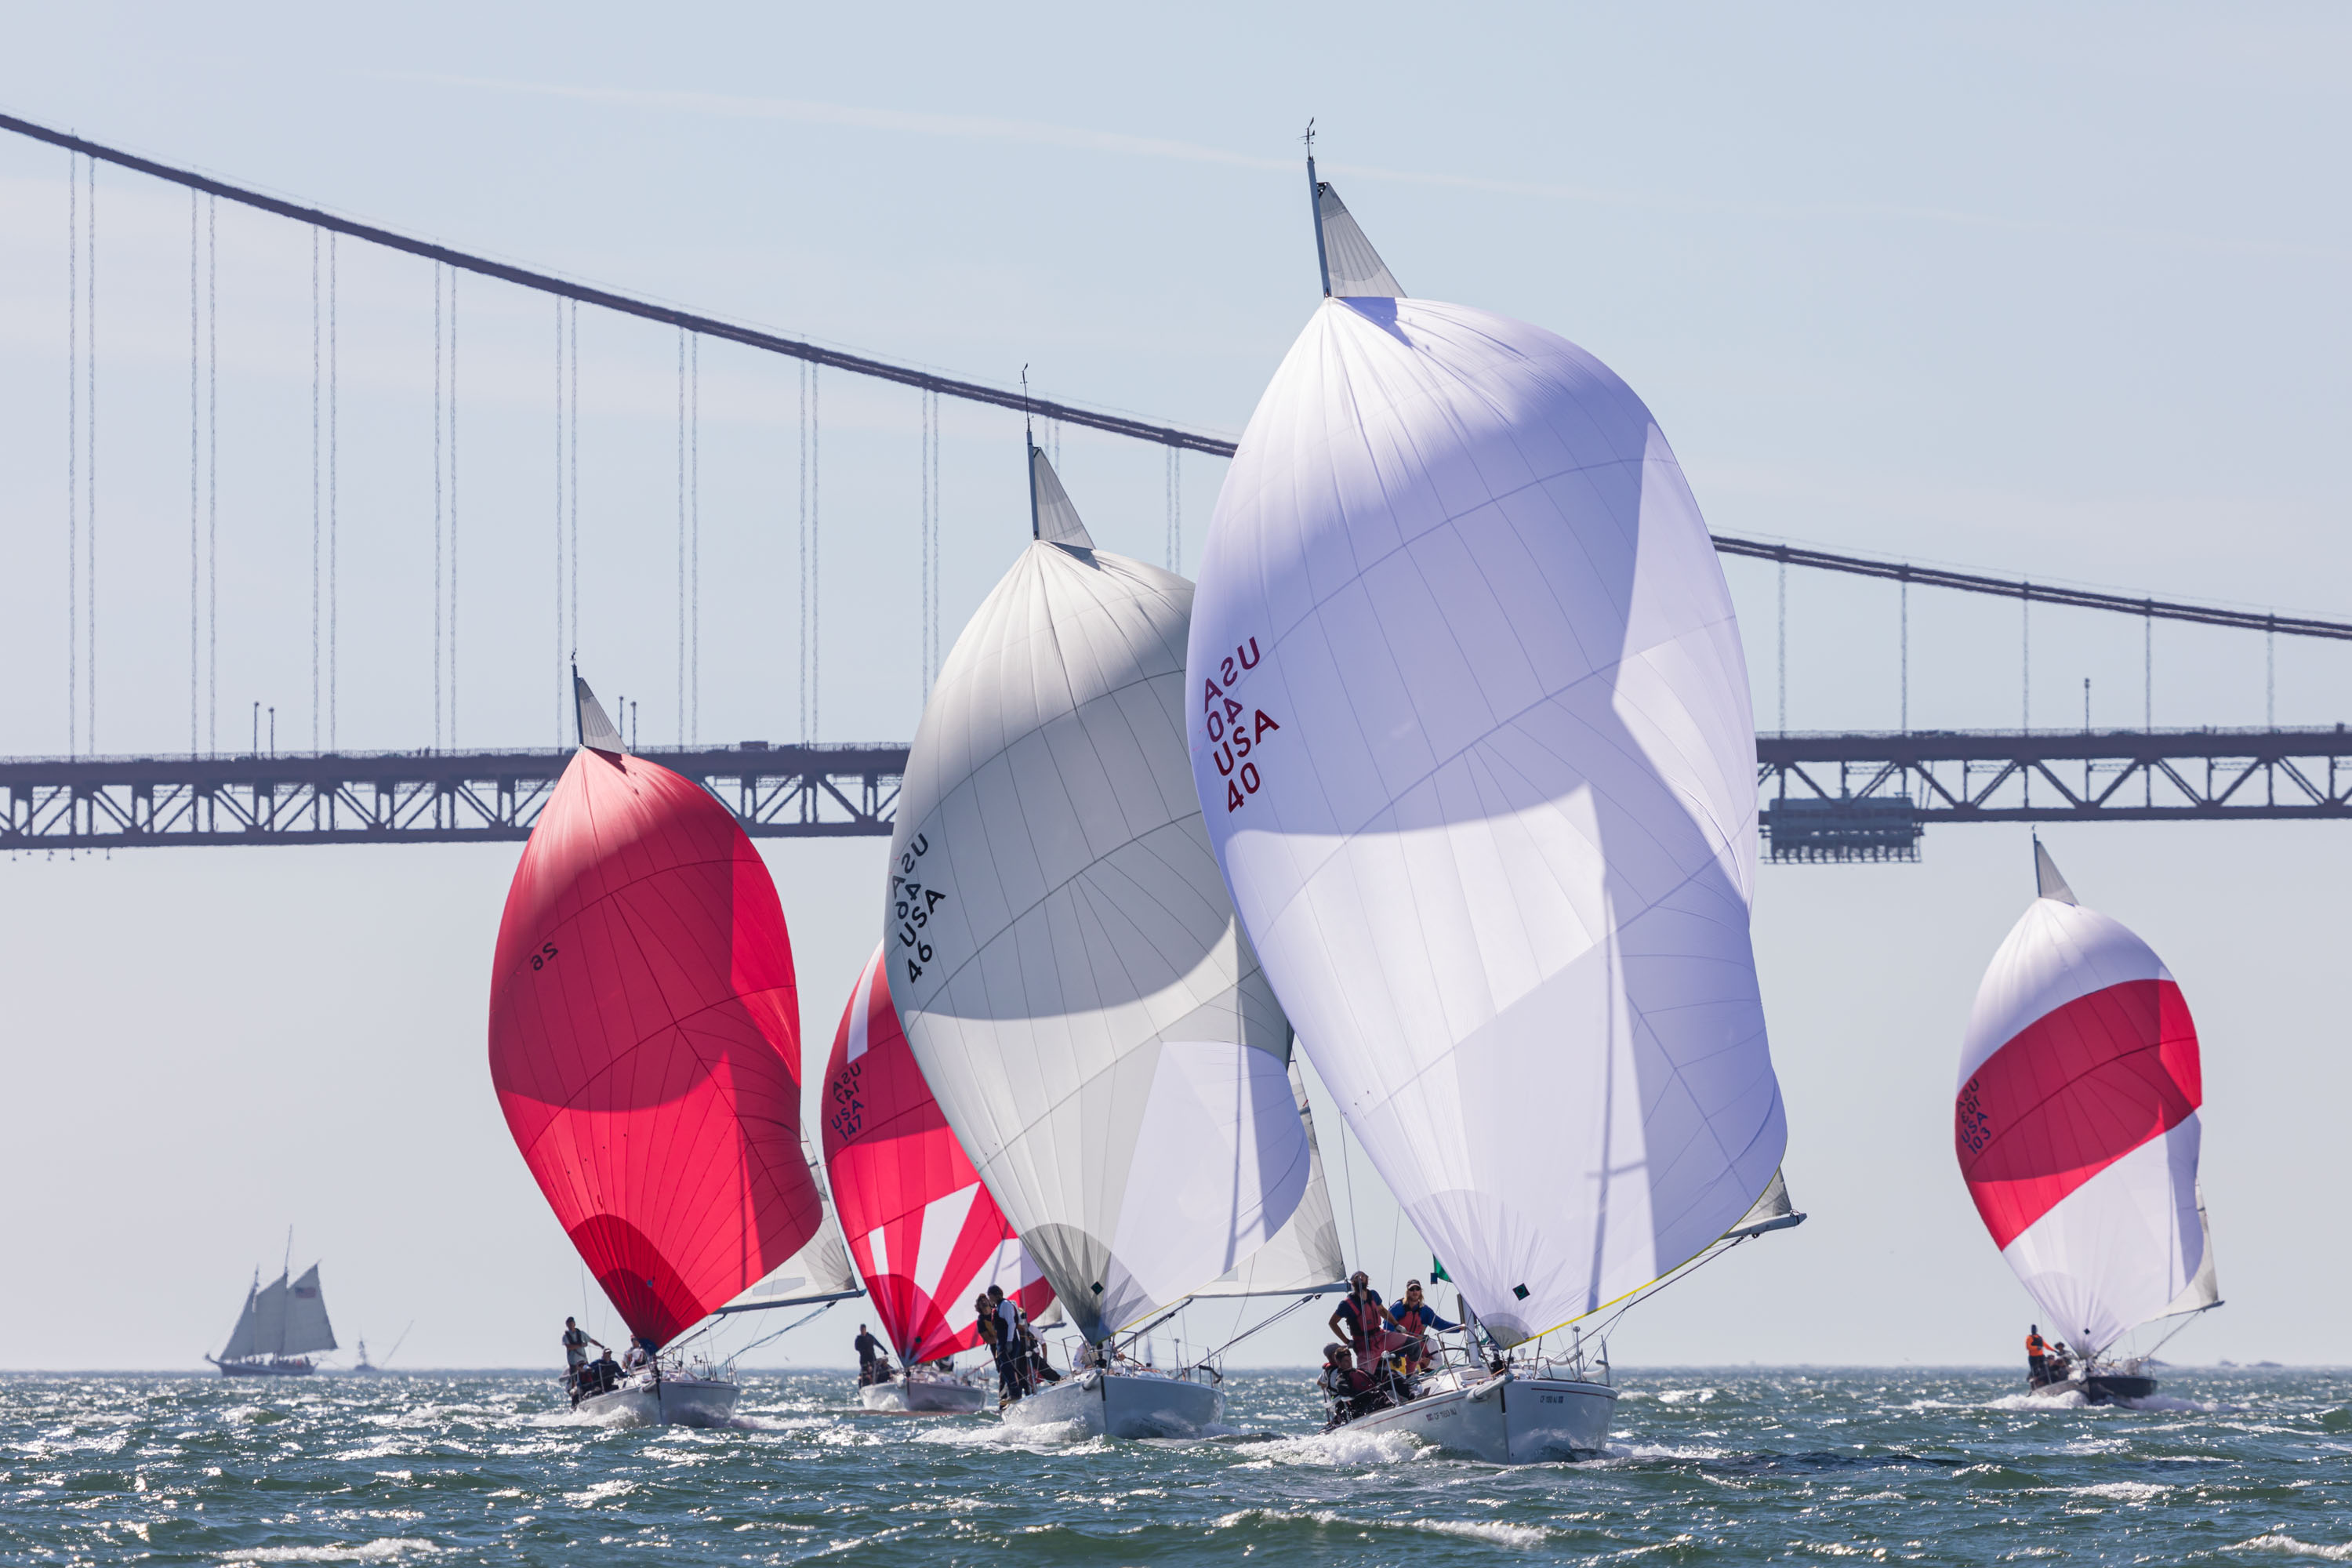  Various Classes  2019 Big Boat Series  San Francisco CA  Final results after a perfect race day on Frisco Bay